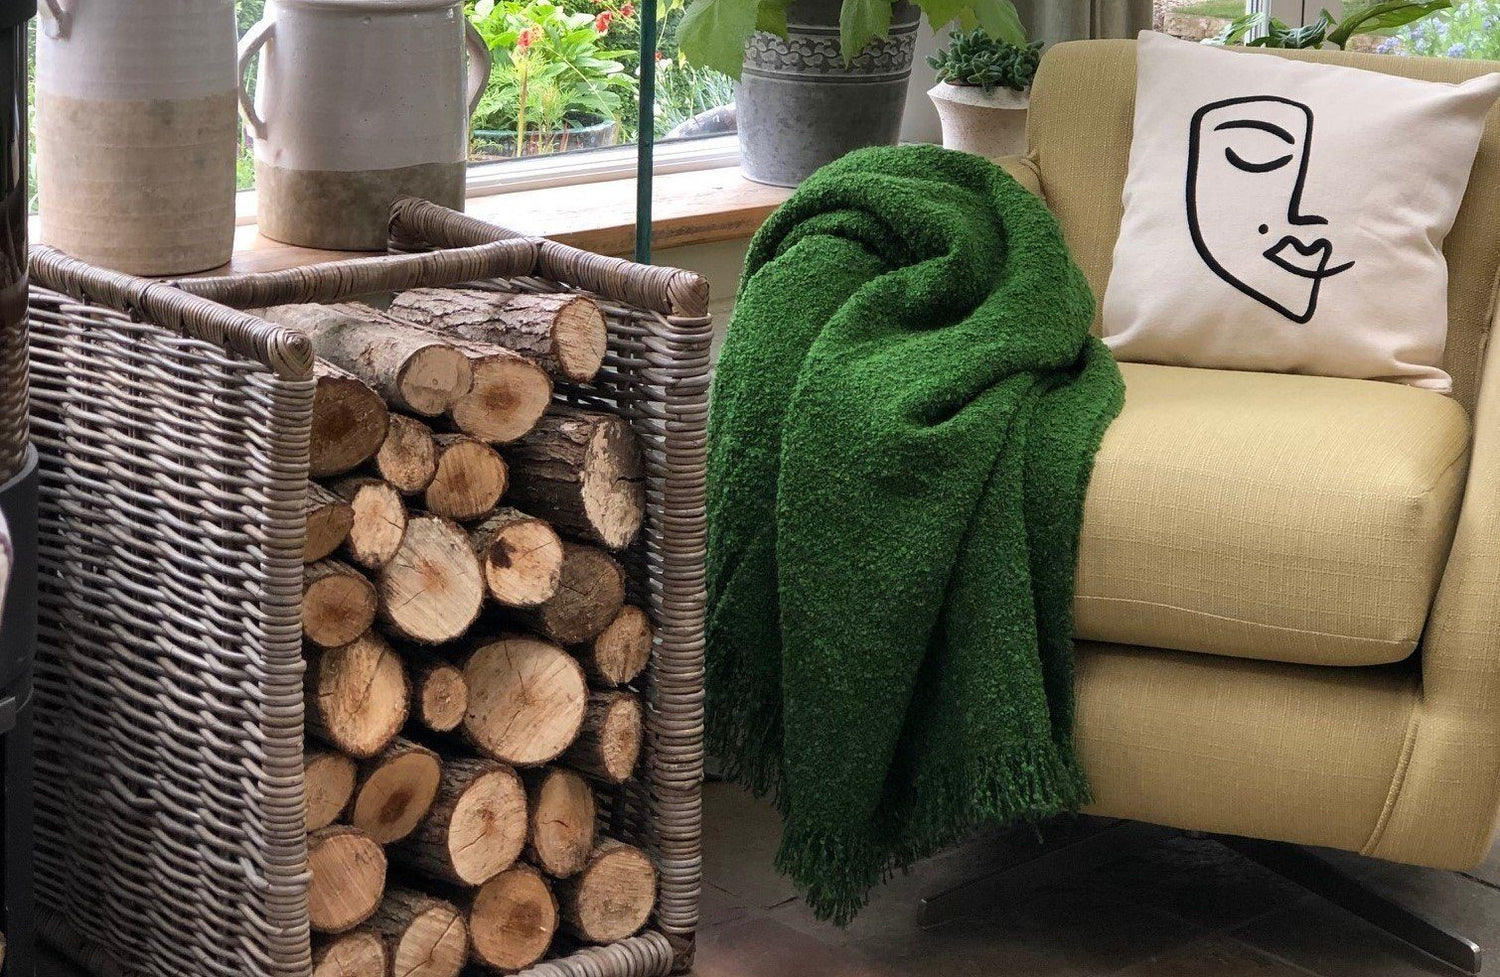 green mohair throw on yellow chair next to log pile